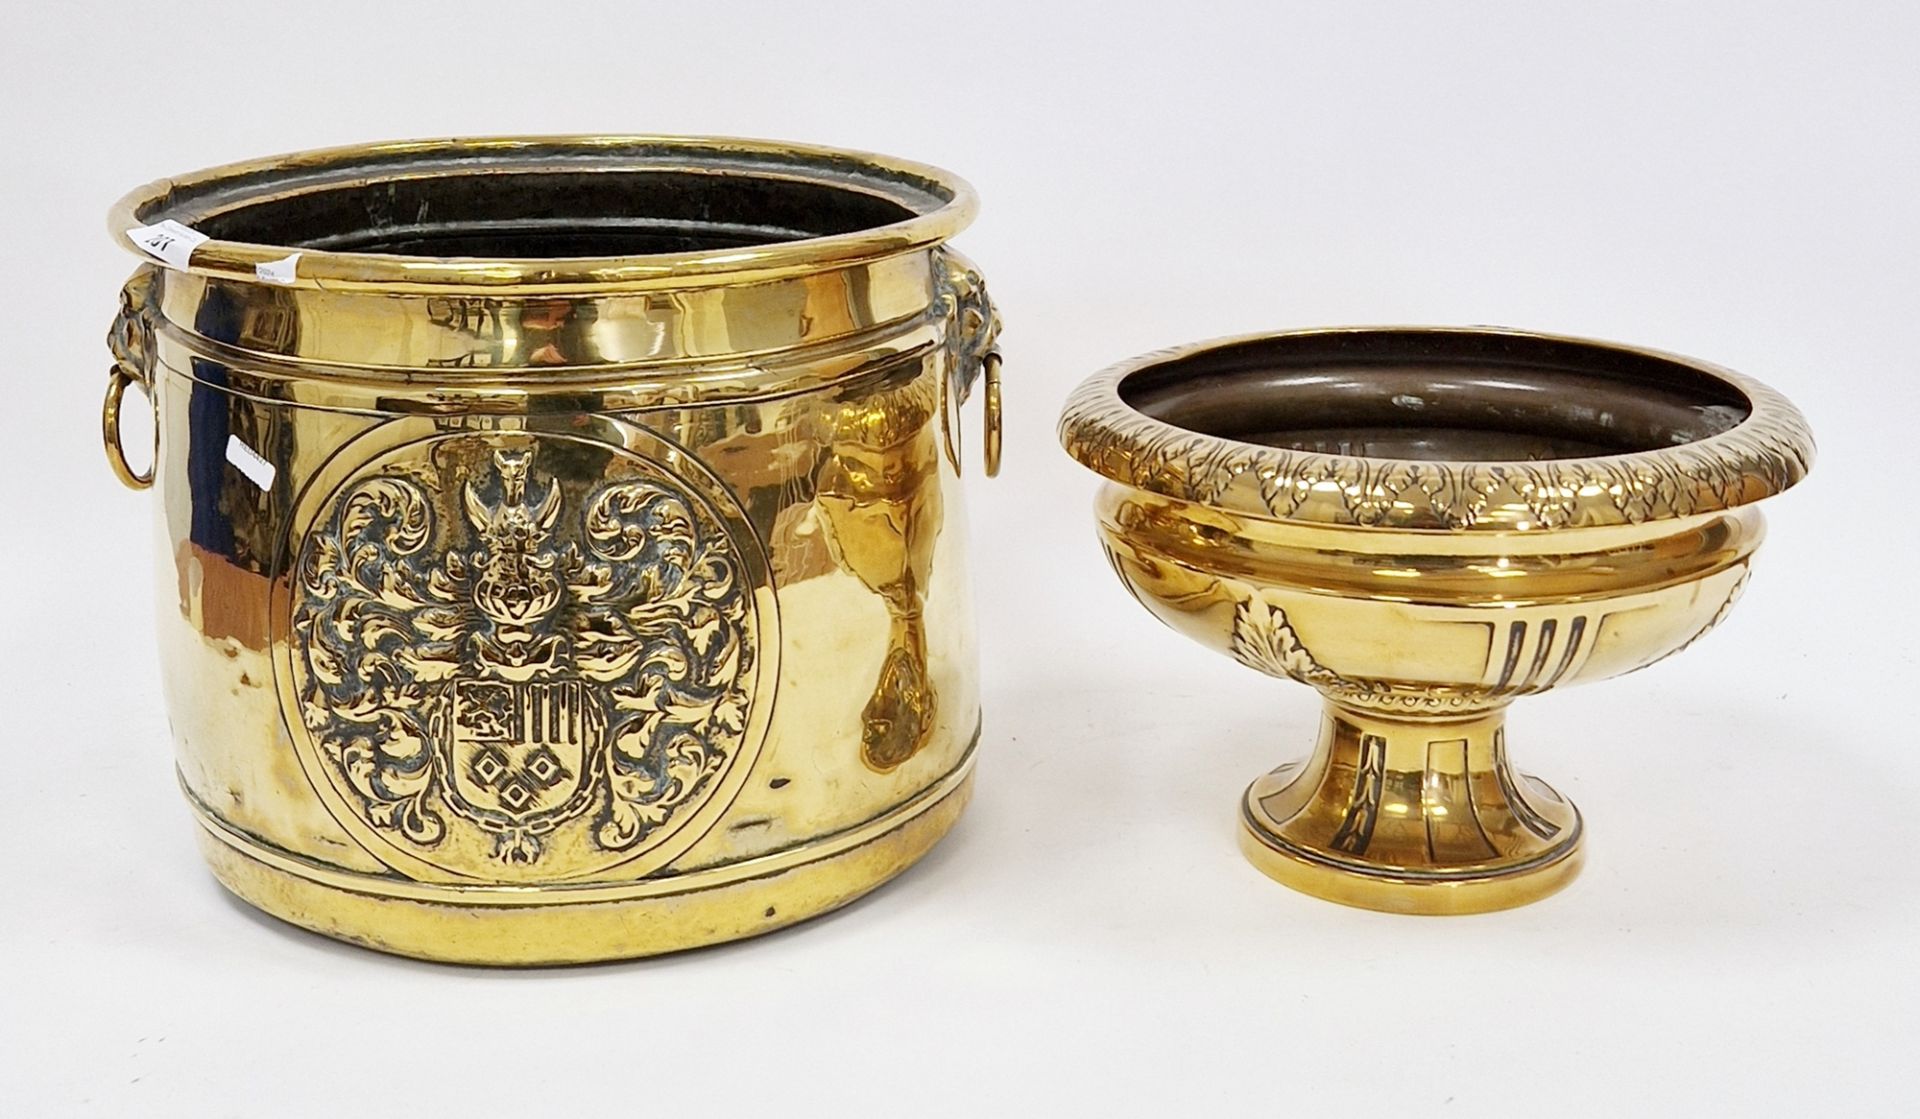 Edwardian embossed brass coal scuttle of cylindrical form, decorated with a mantled armorial, with - Image 3 of 6